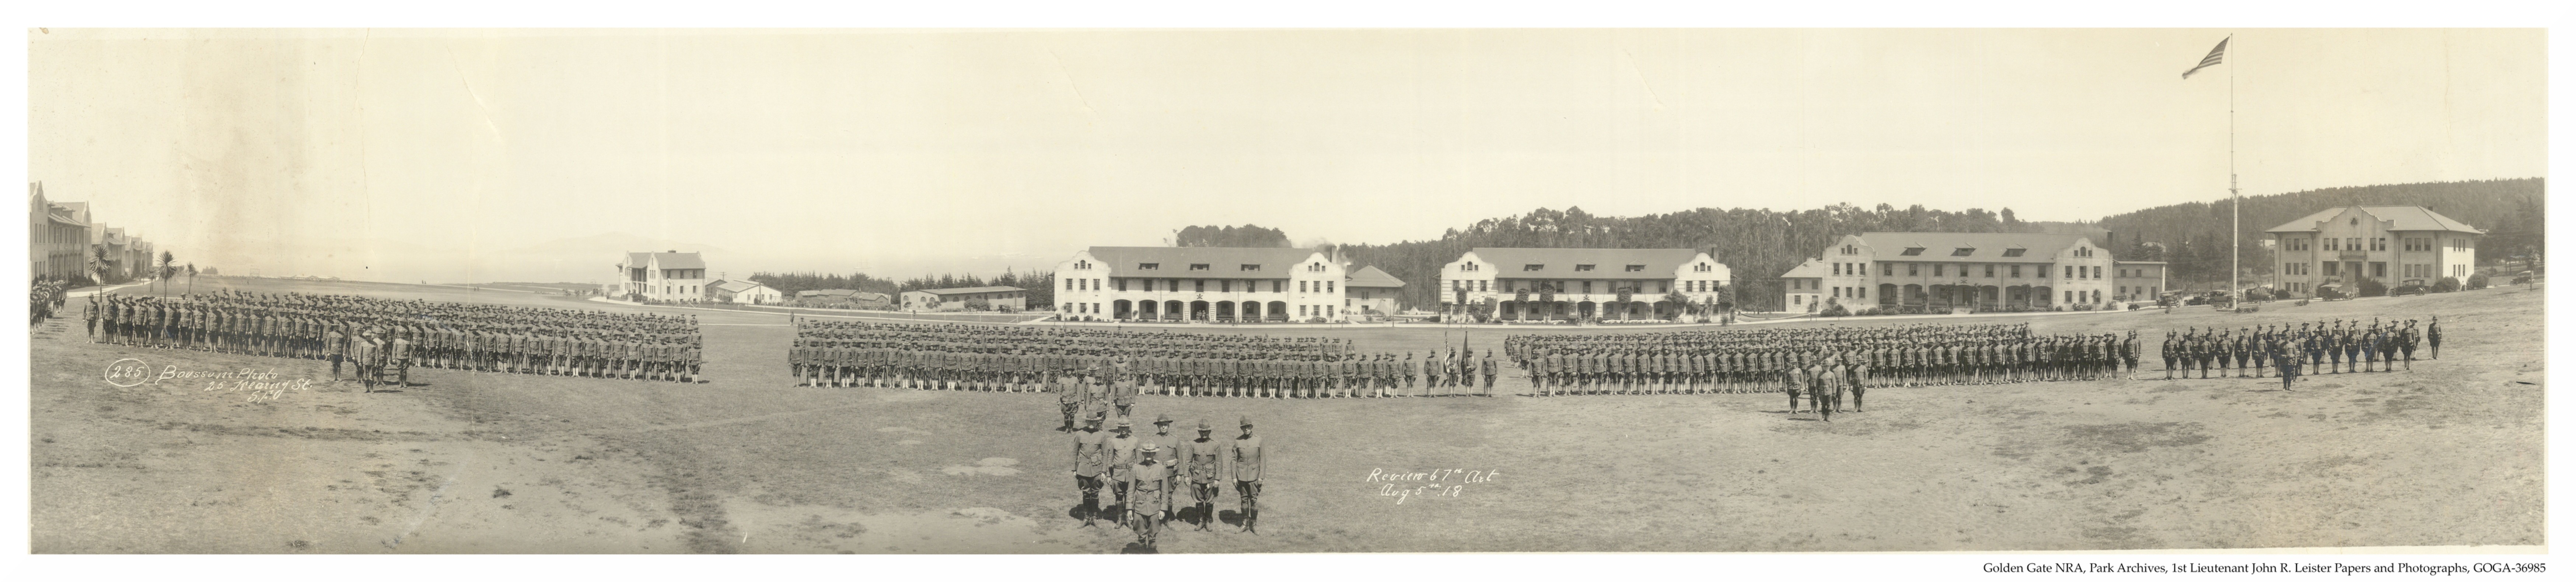 Review of 67th artillery at fort Winfield Scott presidio of San Francisco 1918